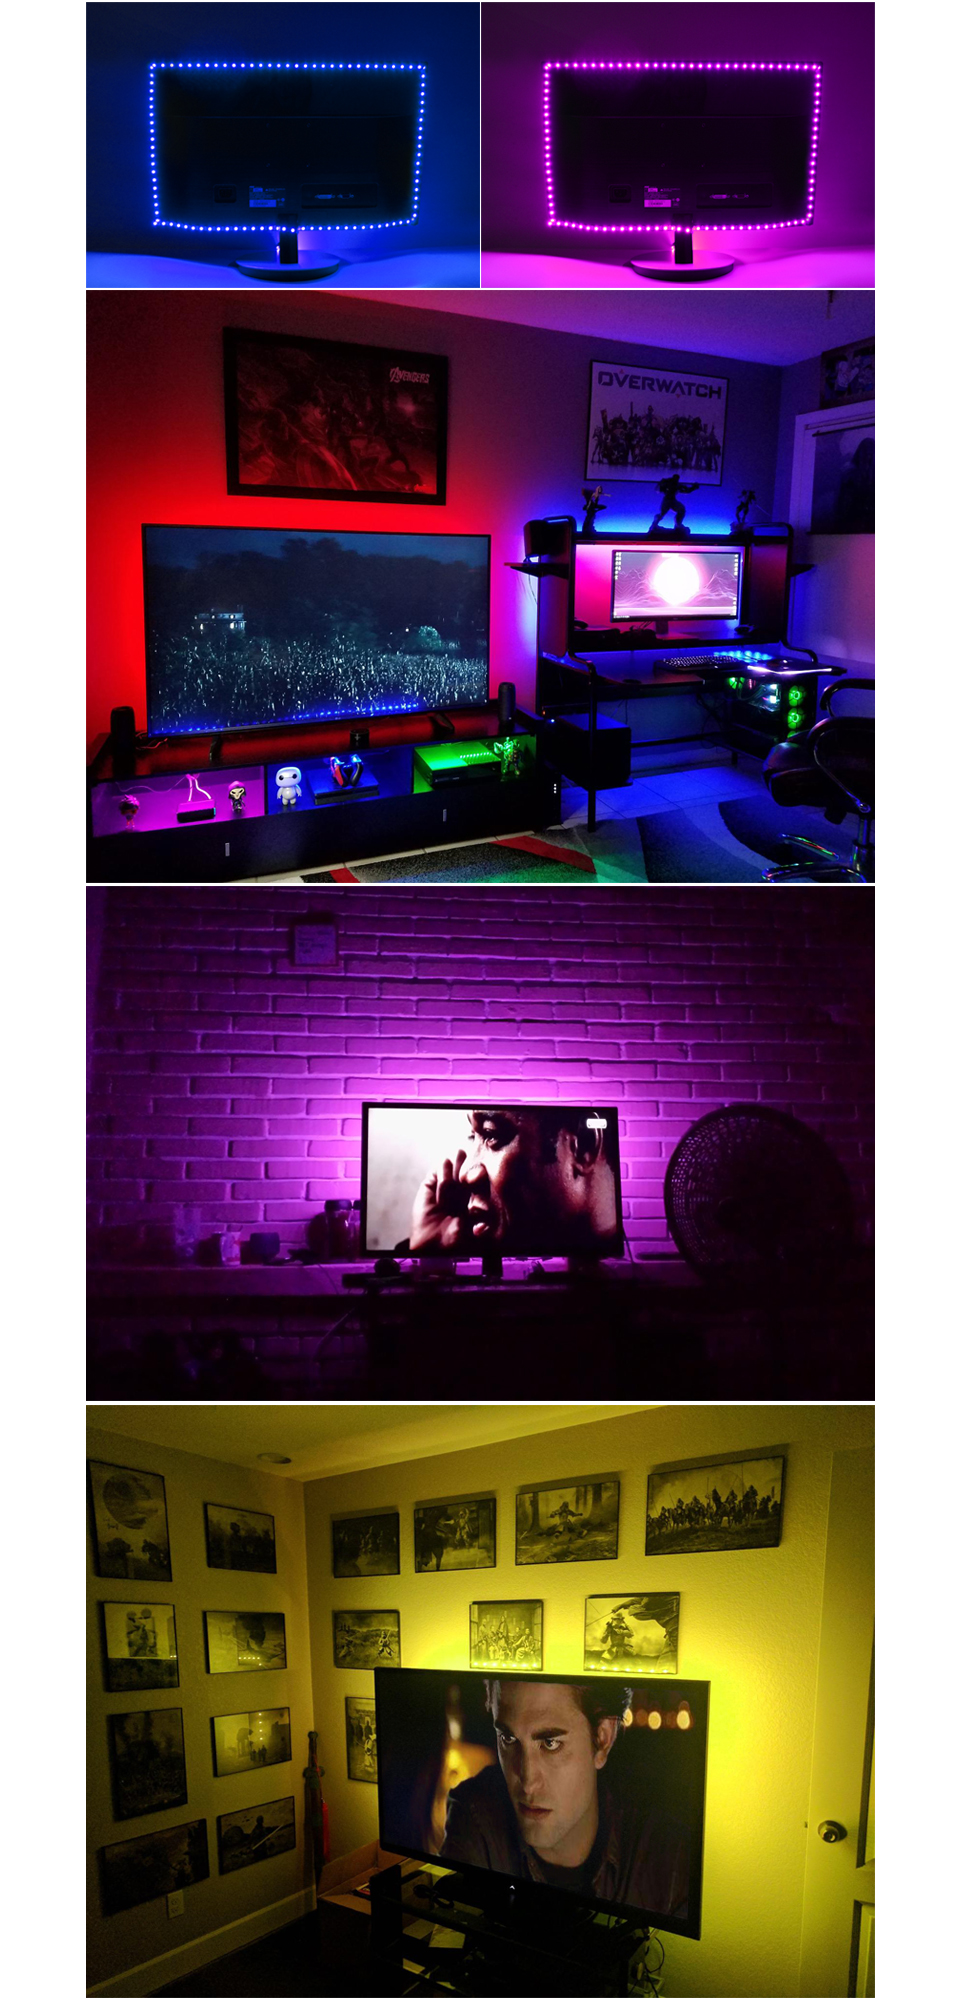 USB Power RGB LED light 1M 2M 3M 4M 5M 5V 5050 SMD LED Strip light lamp LCD Monitor TV Background lighting RF remote Control